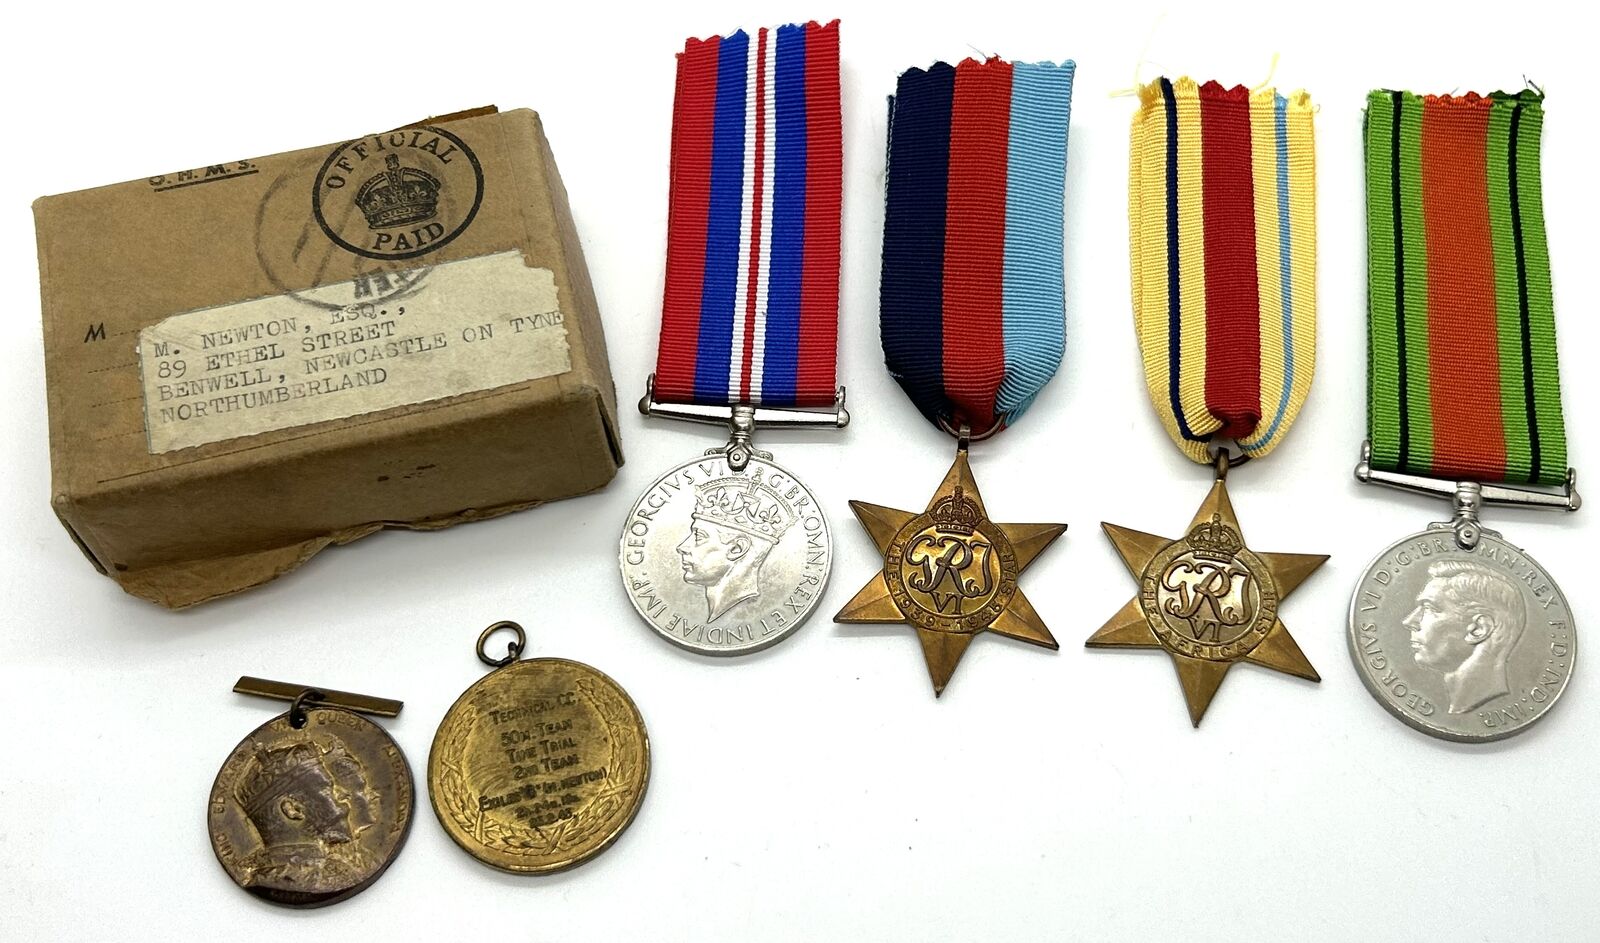 WWII RAF Royal Air Force Medal Group, M. Newton, Newcastle Upon Tyne